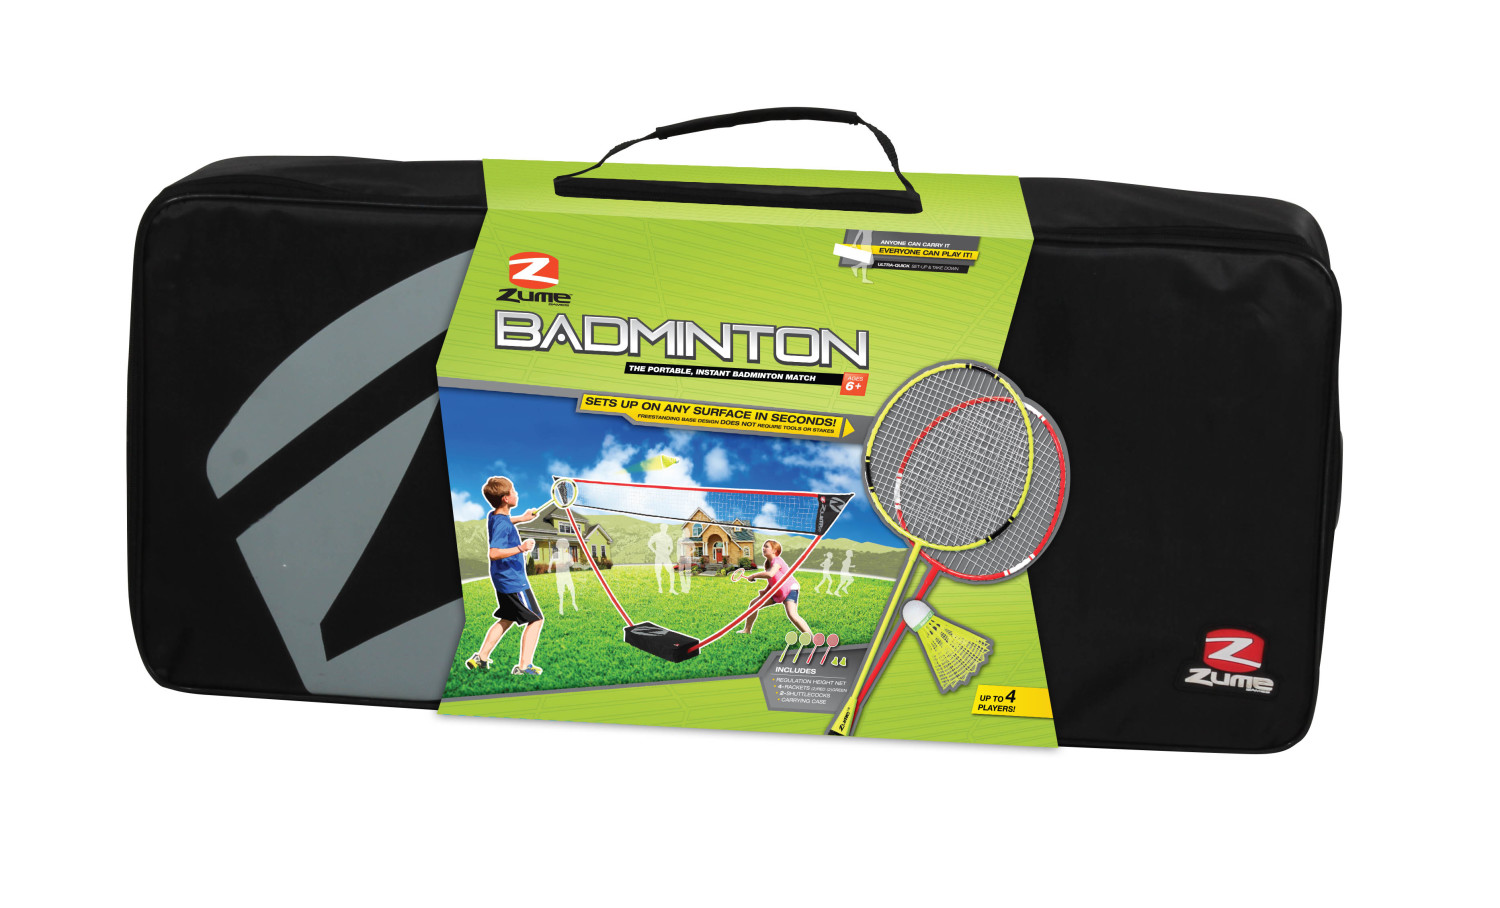 Zume Games Portable Badminton Set with Freestanding Base Sets Up on Any Surface in Seconds. No Tools or Stakes Required - image 3 of 12